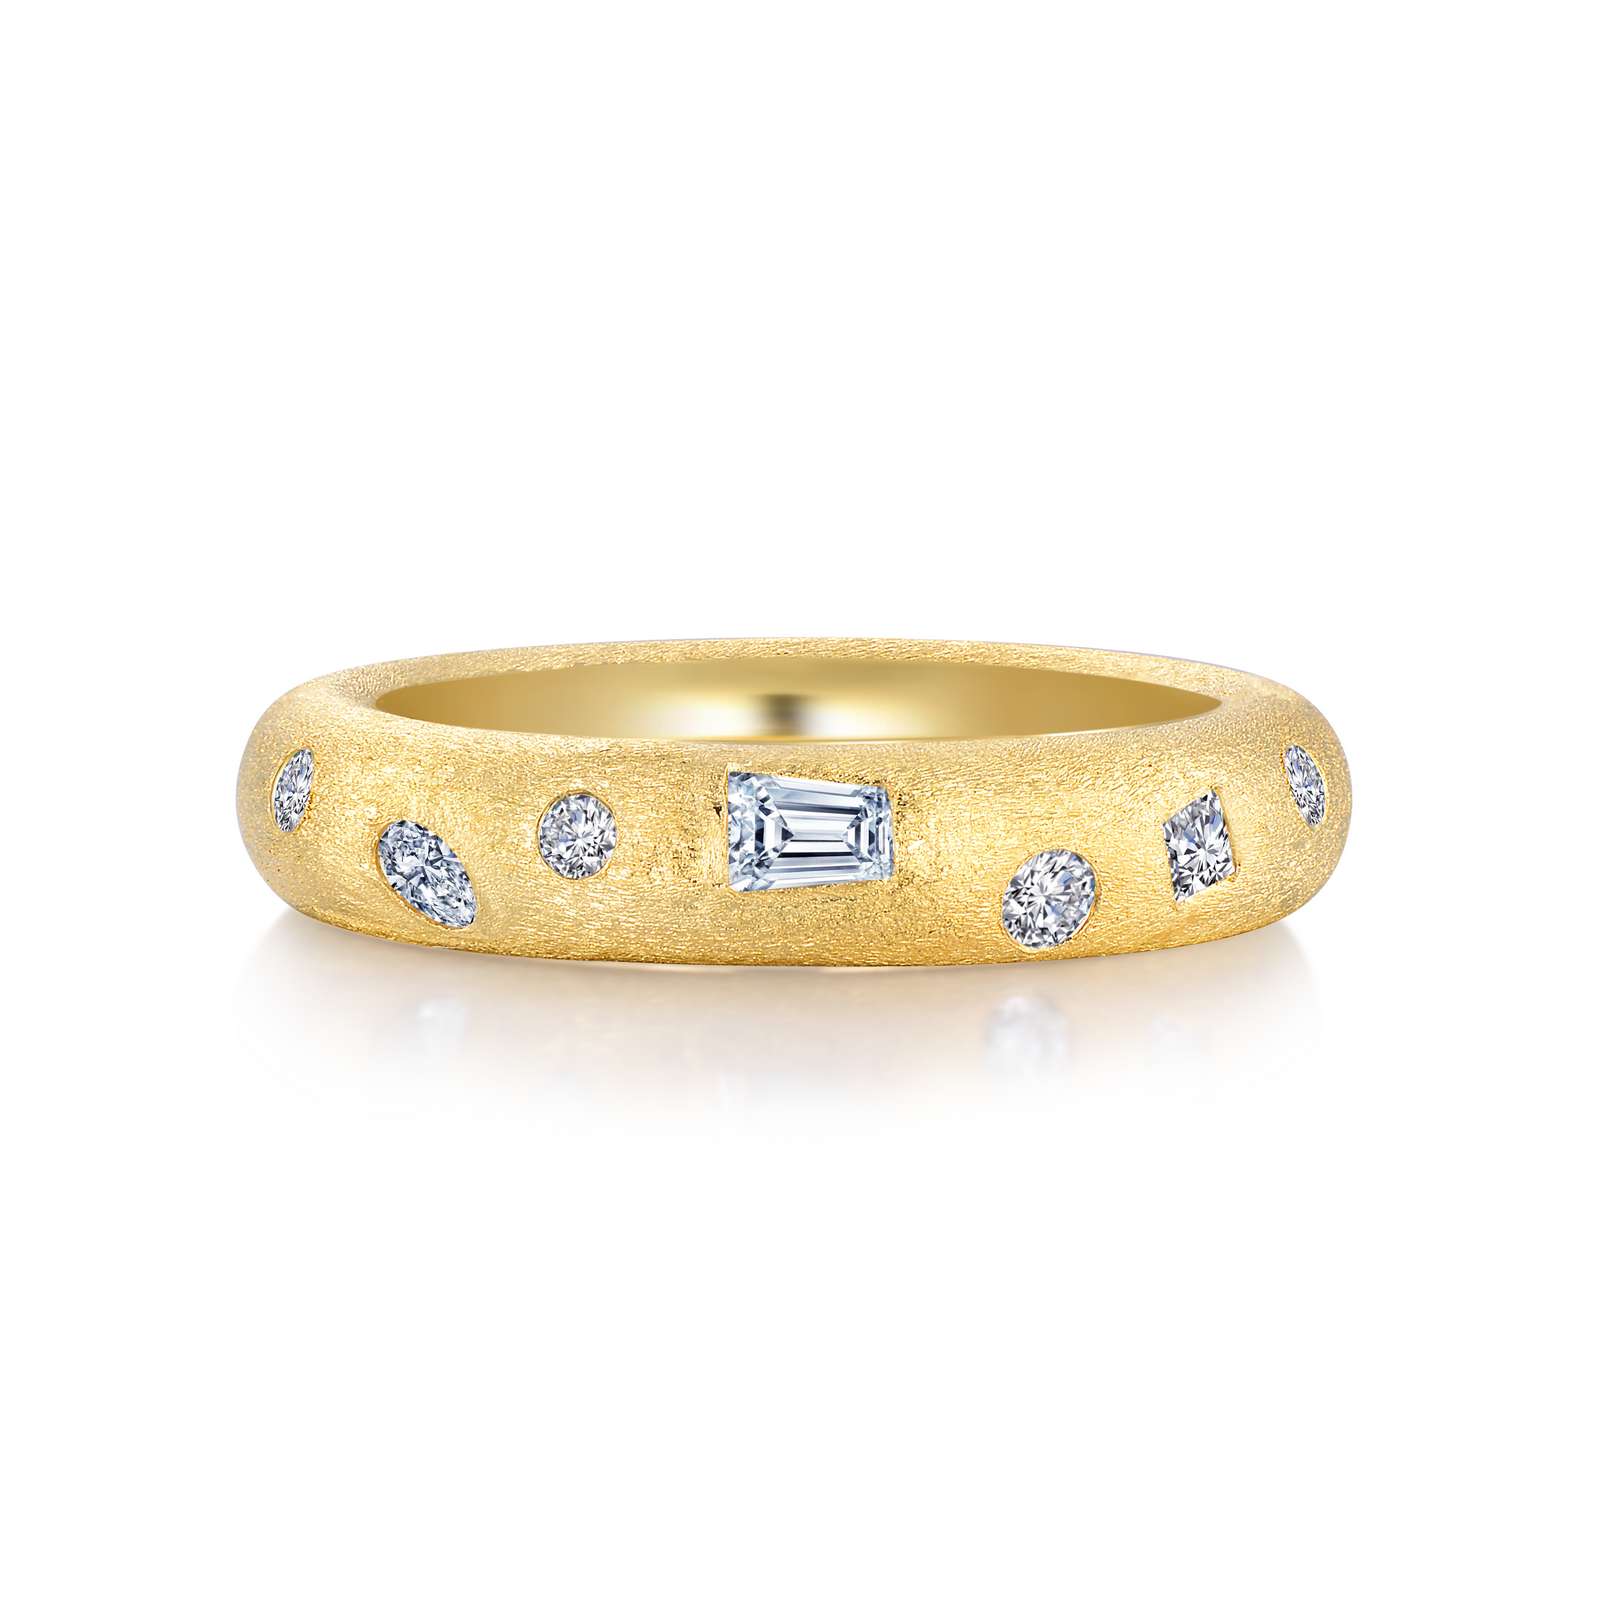 Flush Set Wedding Band Griner Jewelry Co. Moultrie, GA